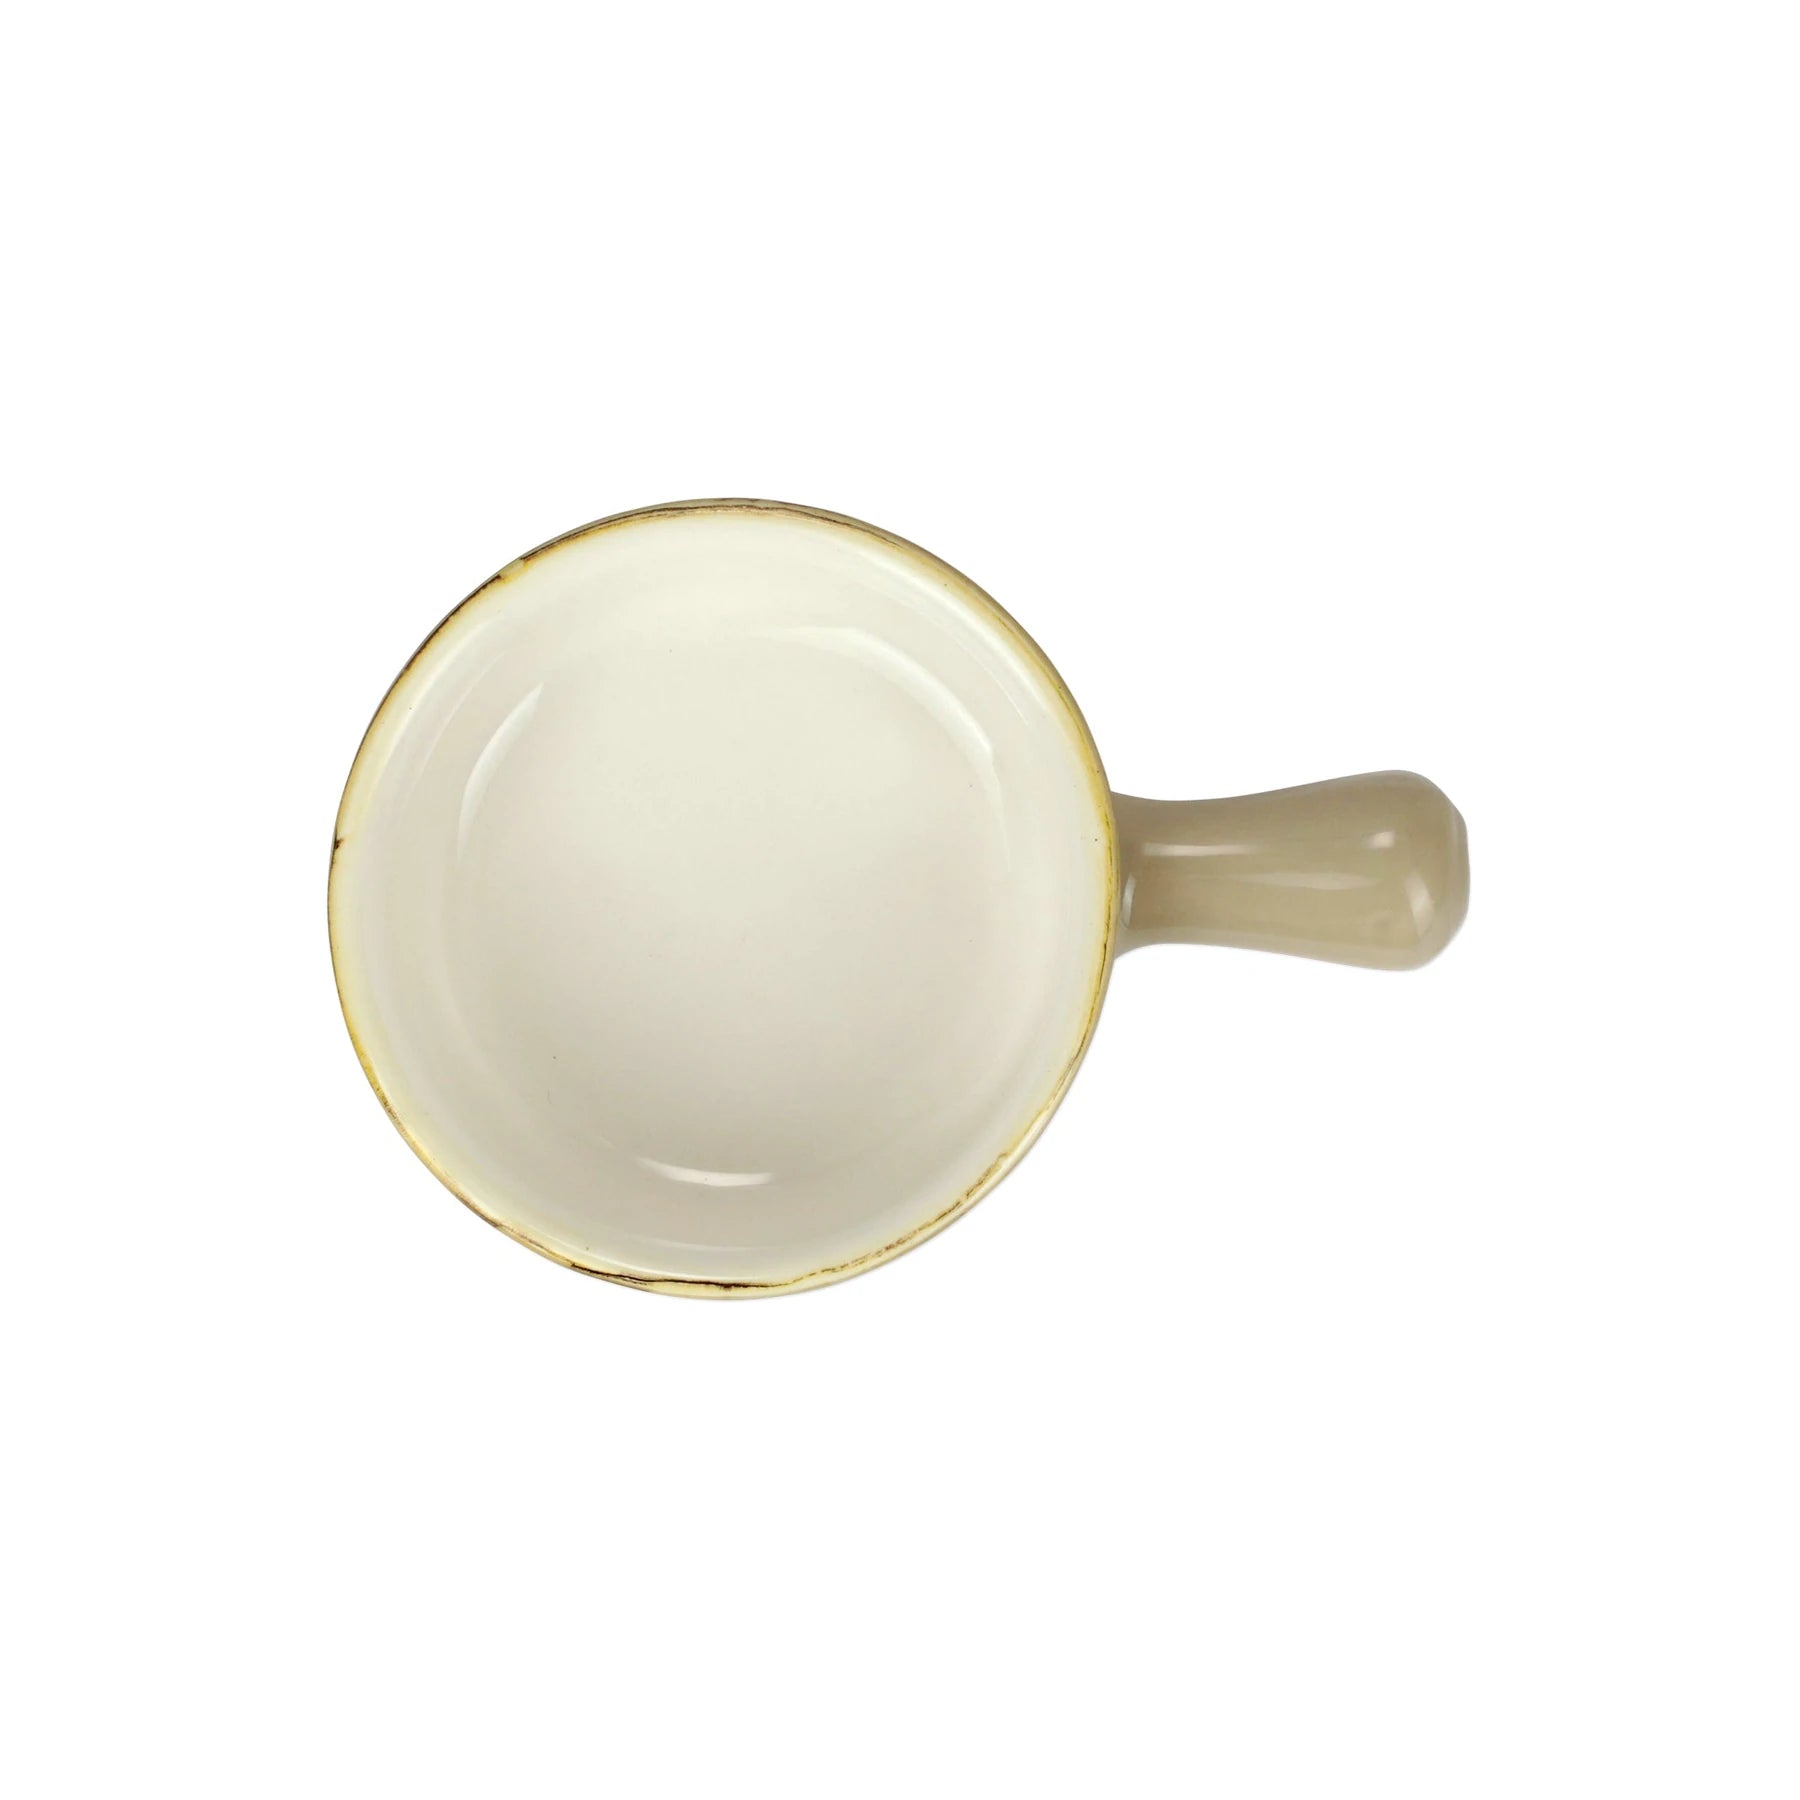 Italian Bakers Cappuccino Small Round Baker With Large Handle